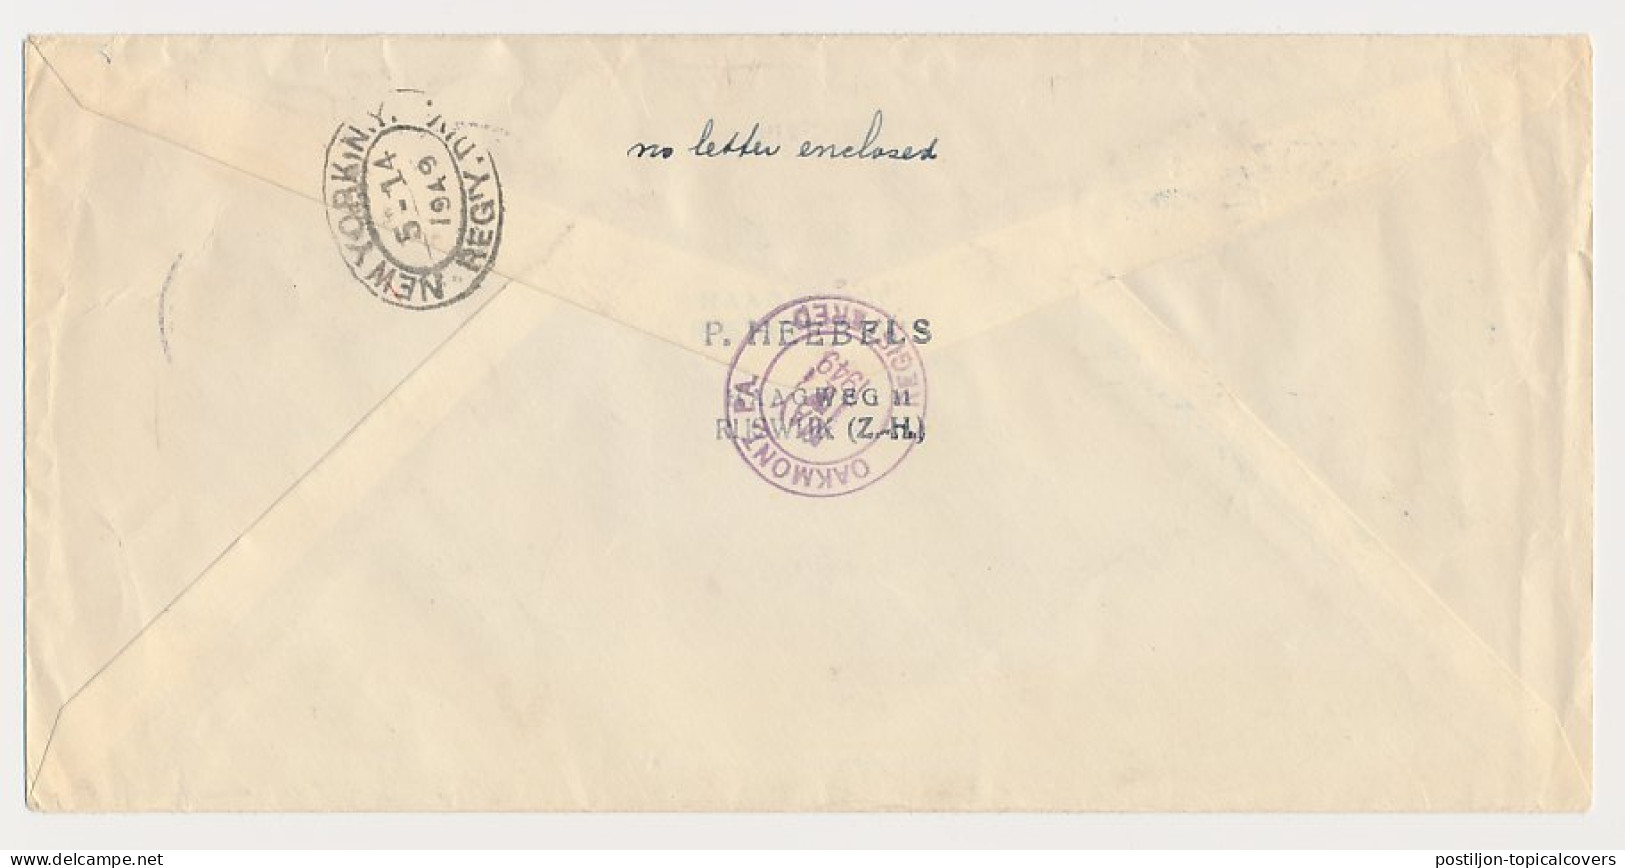 FDC / 1e Dag Em. Zomer 1949 - Uitgave Breel  - Unclassified